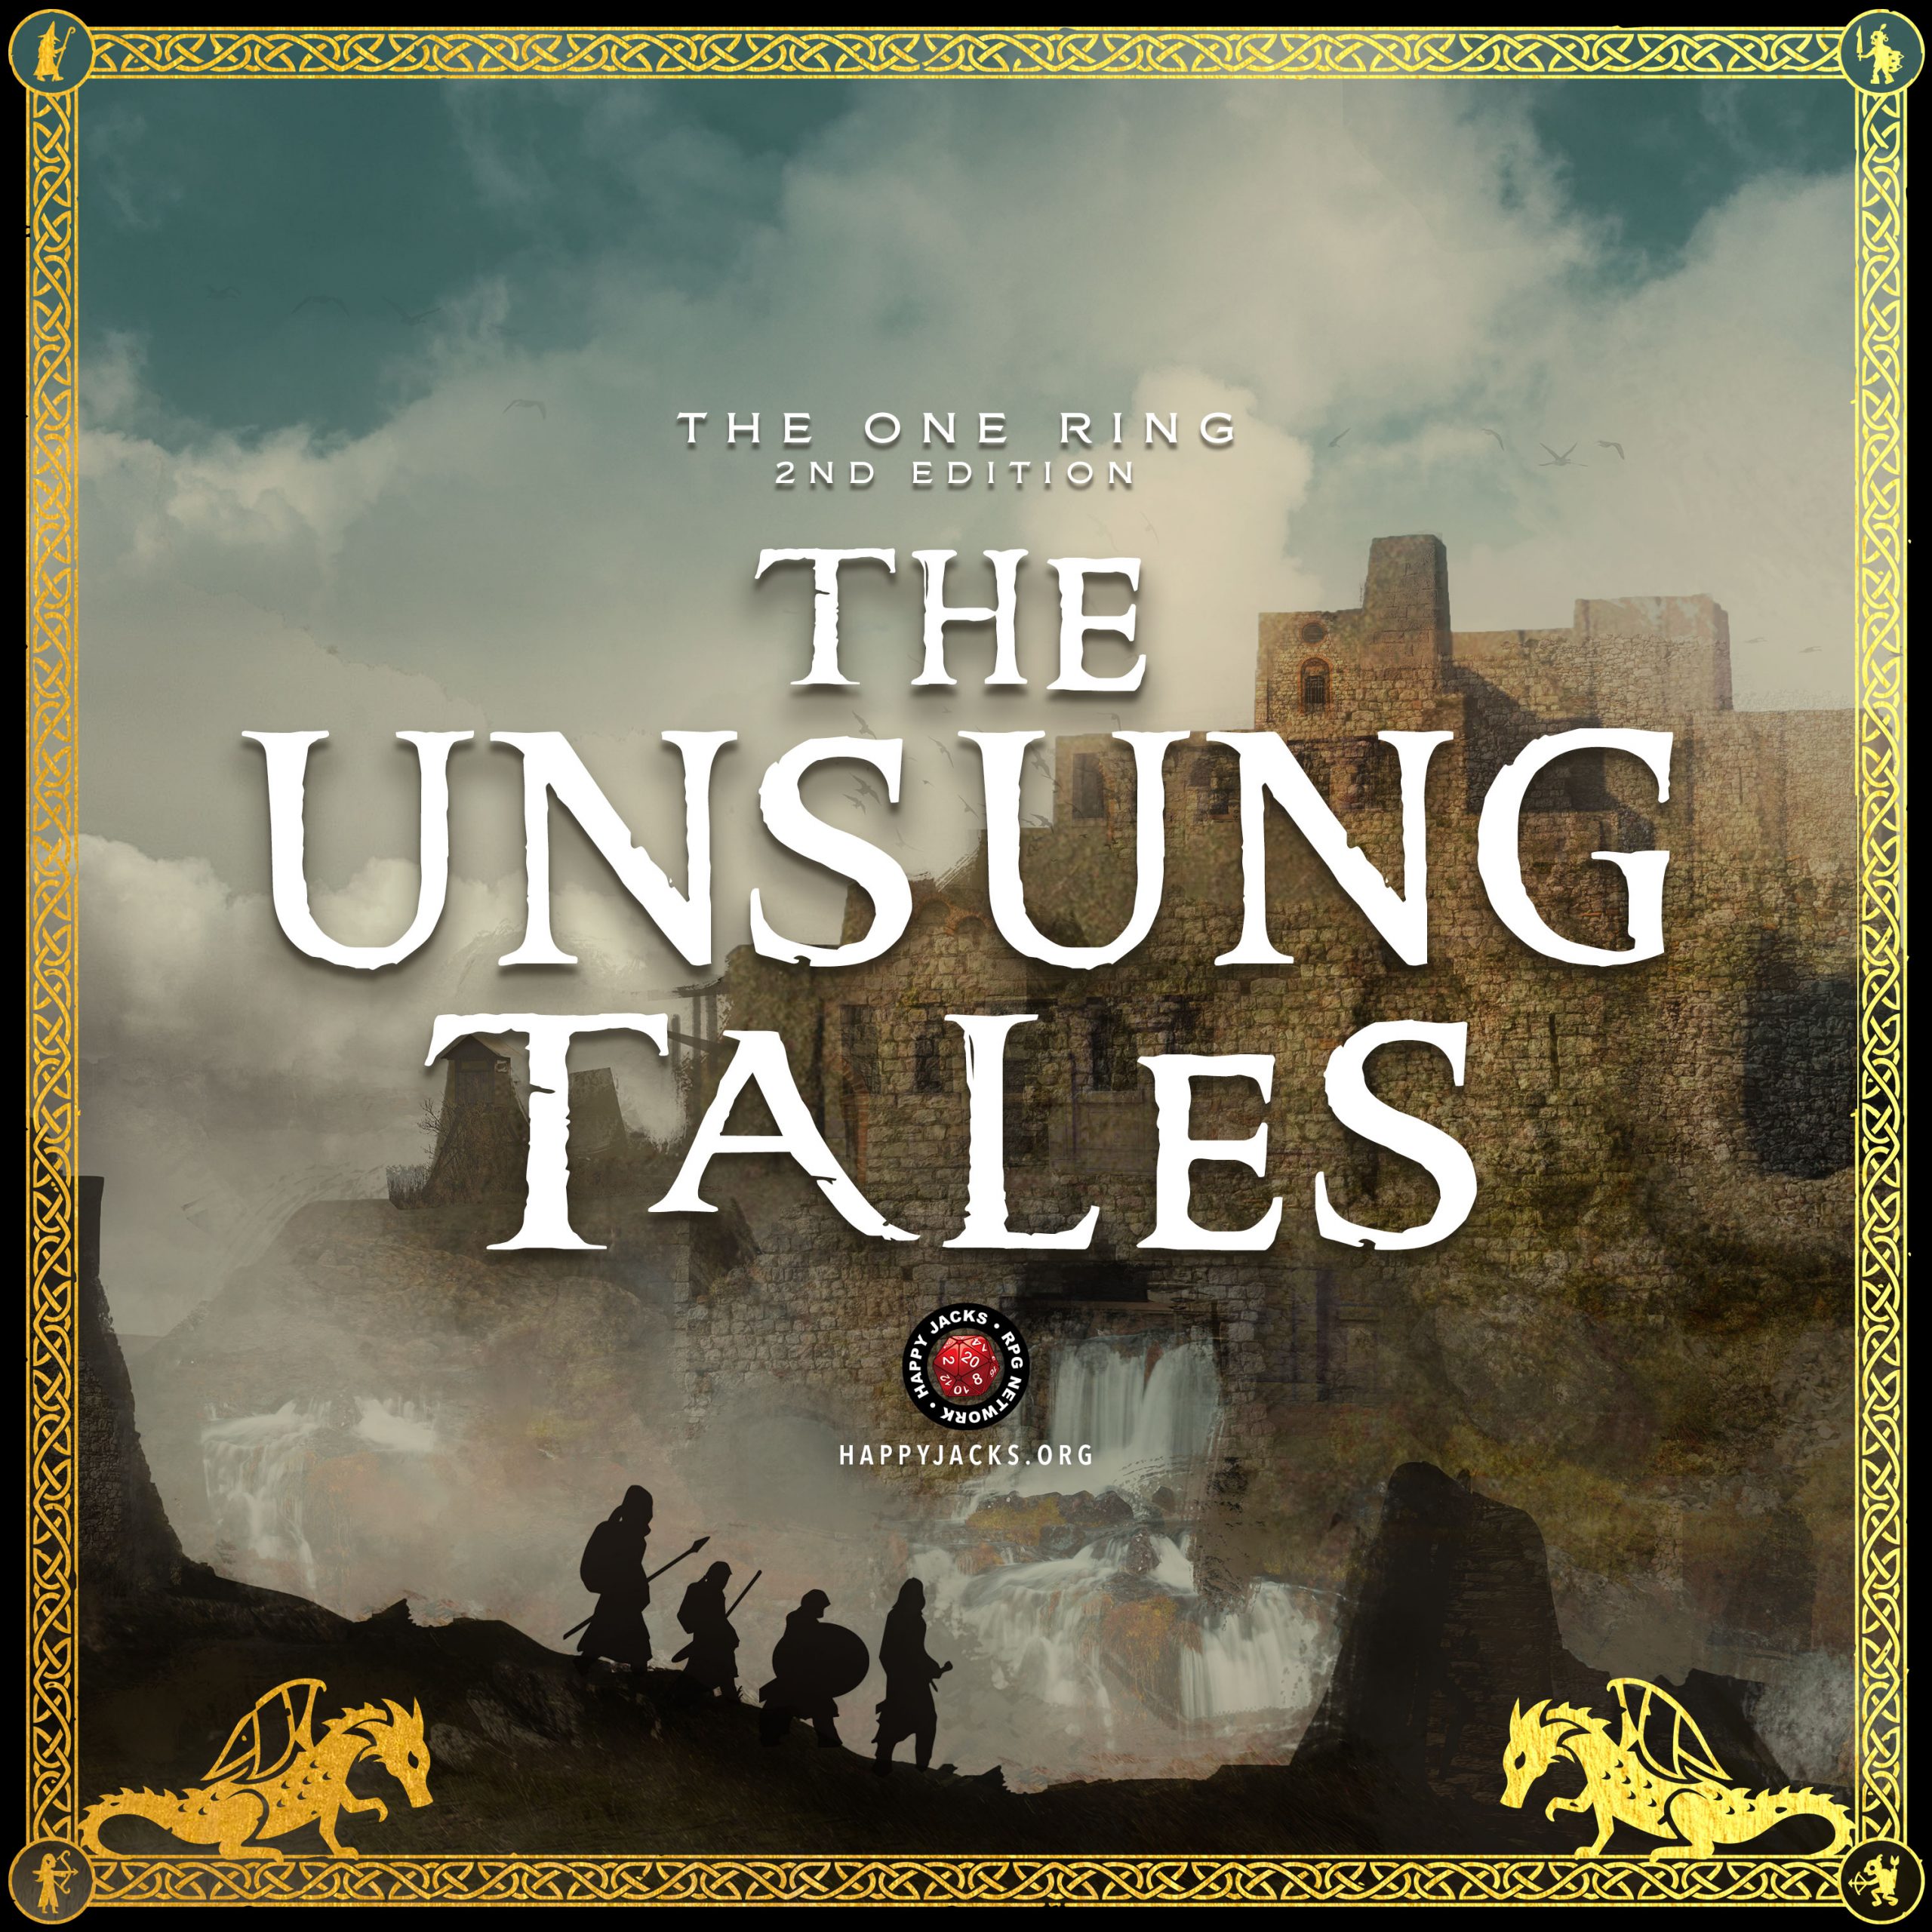 UNSUNG03 The Nephew | The Unsung Tales | The One Ring 2e